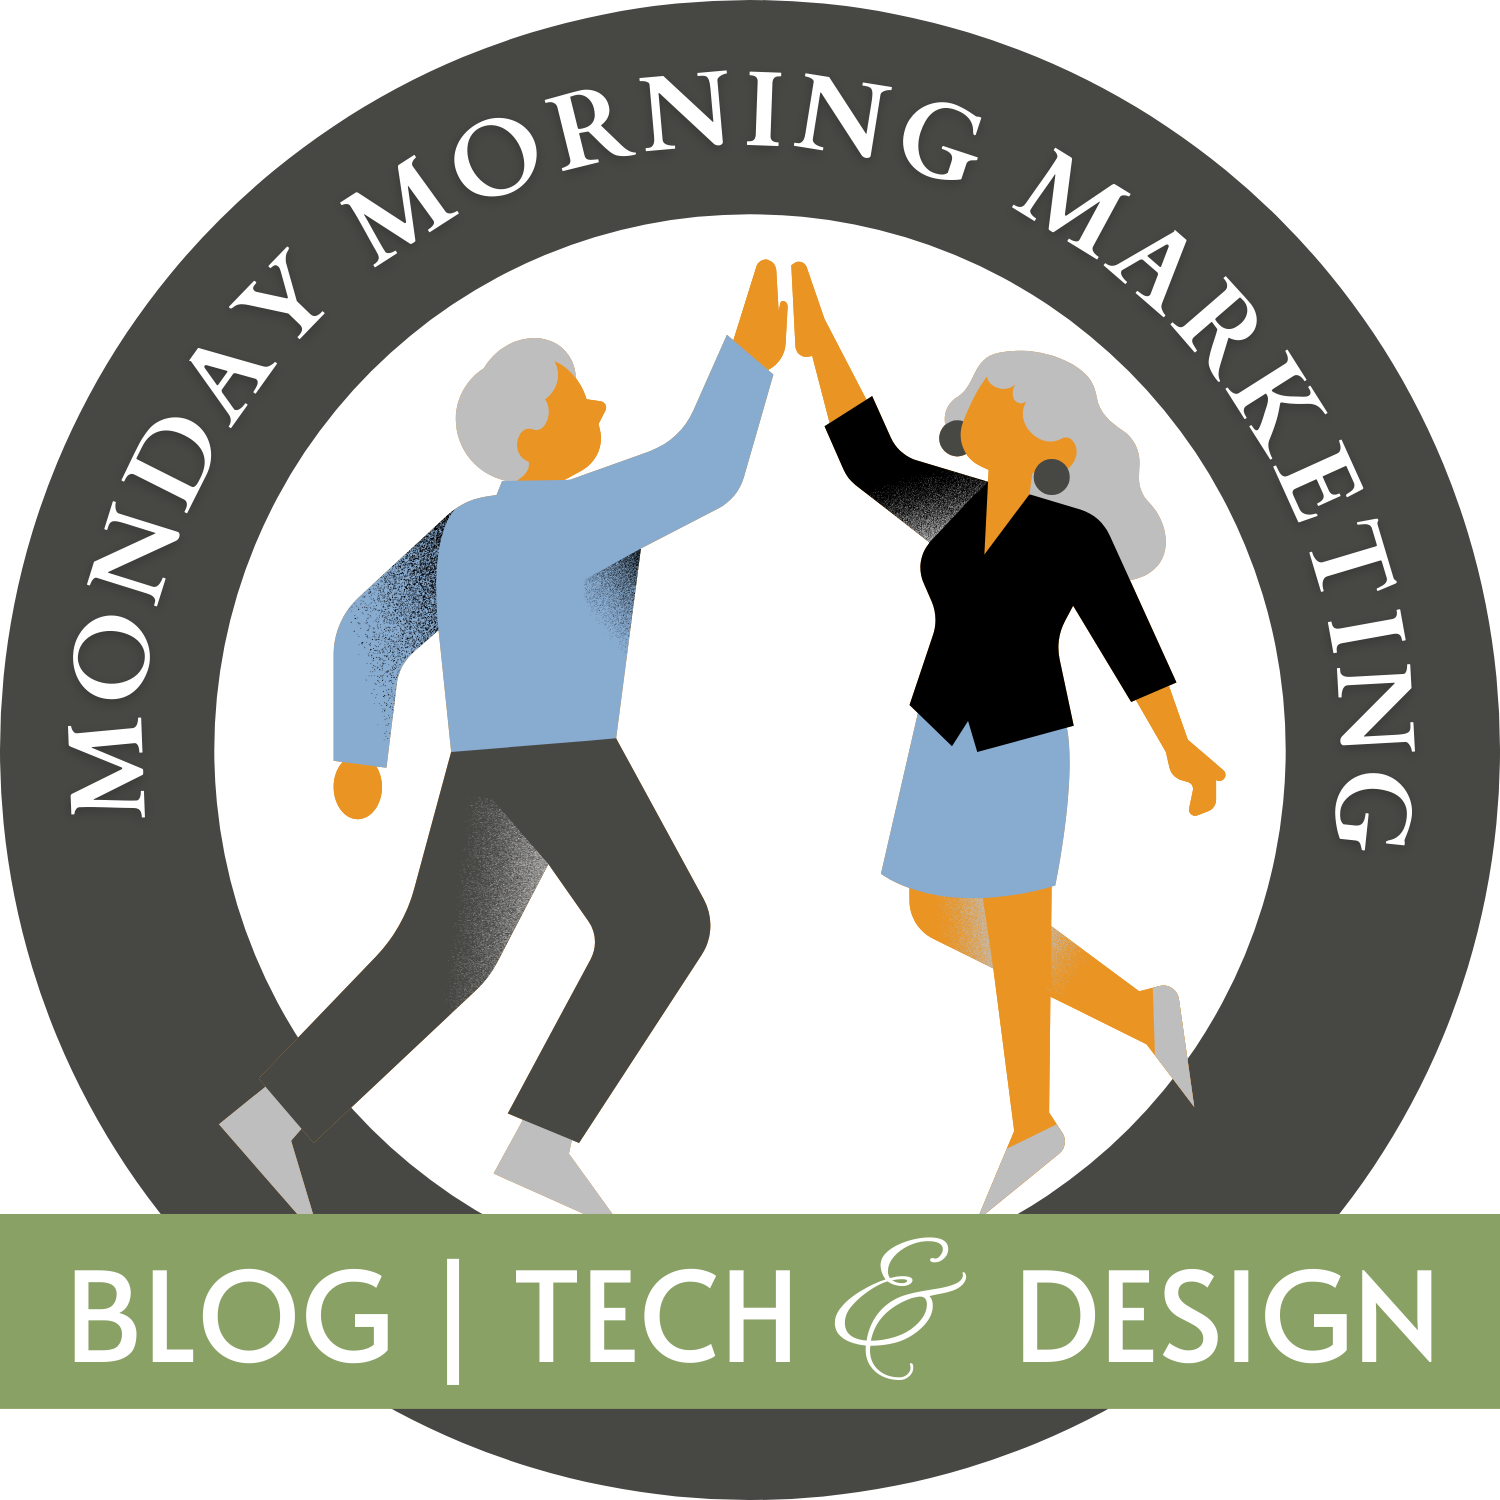 Monday morning marketing logo-circle with man and woman doing a high five